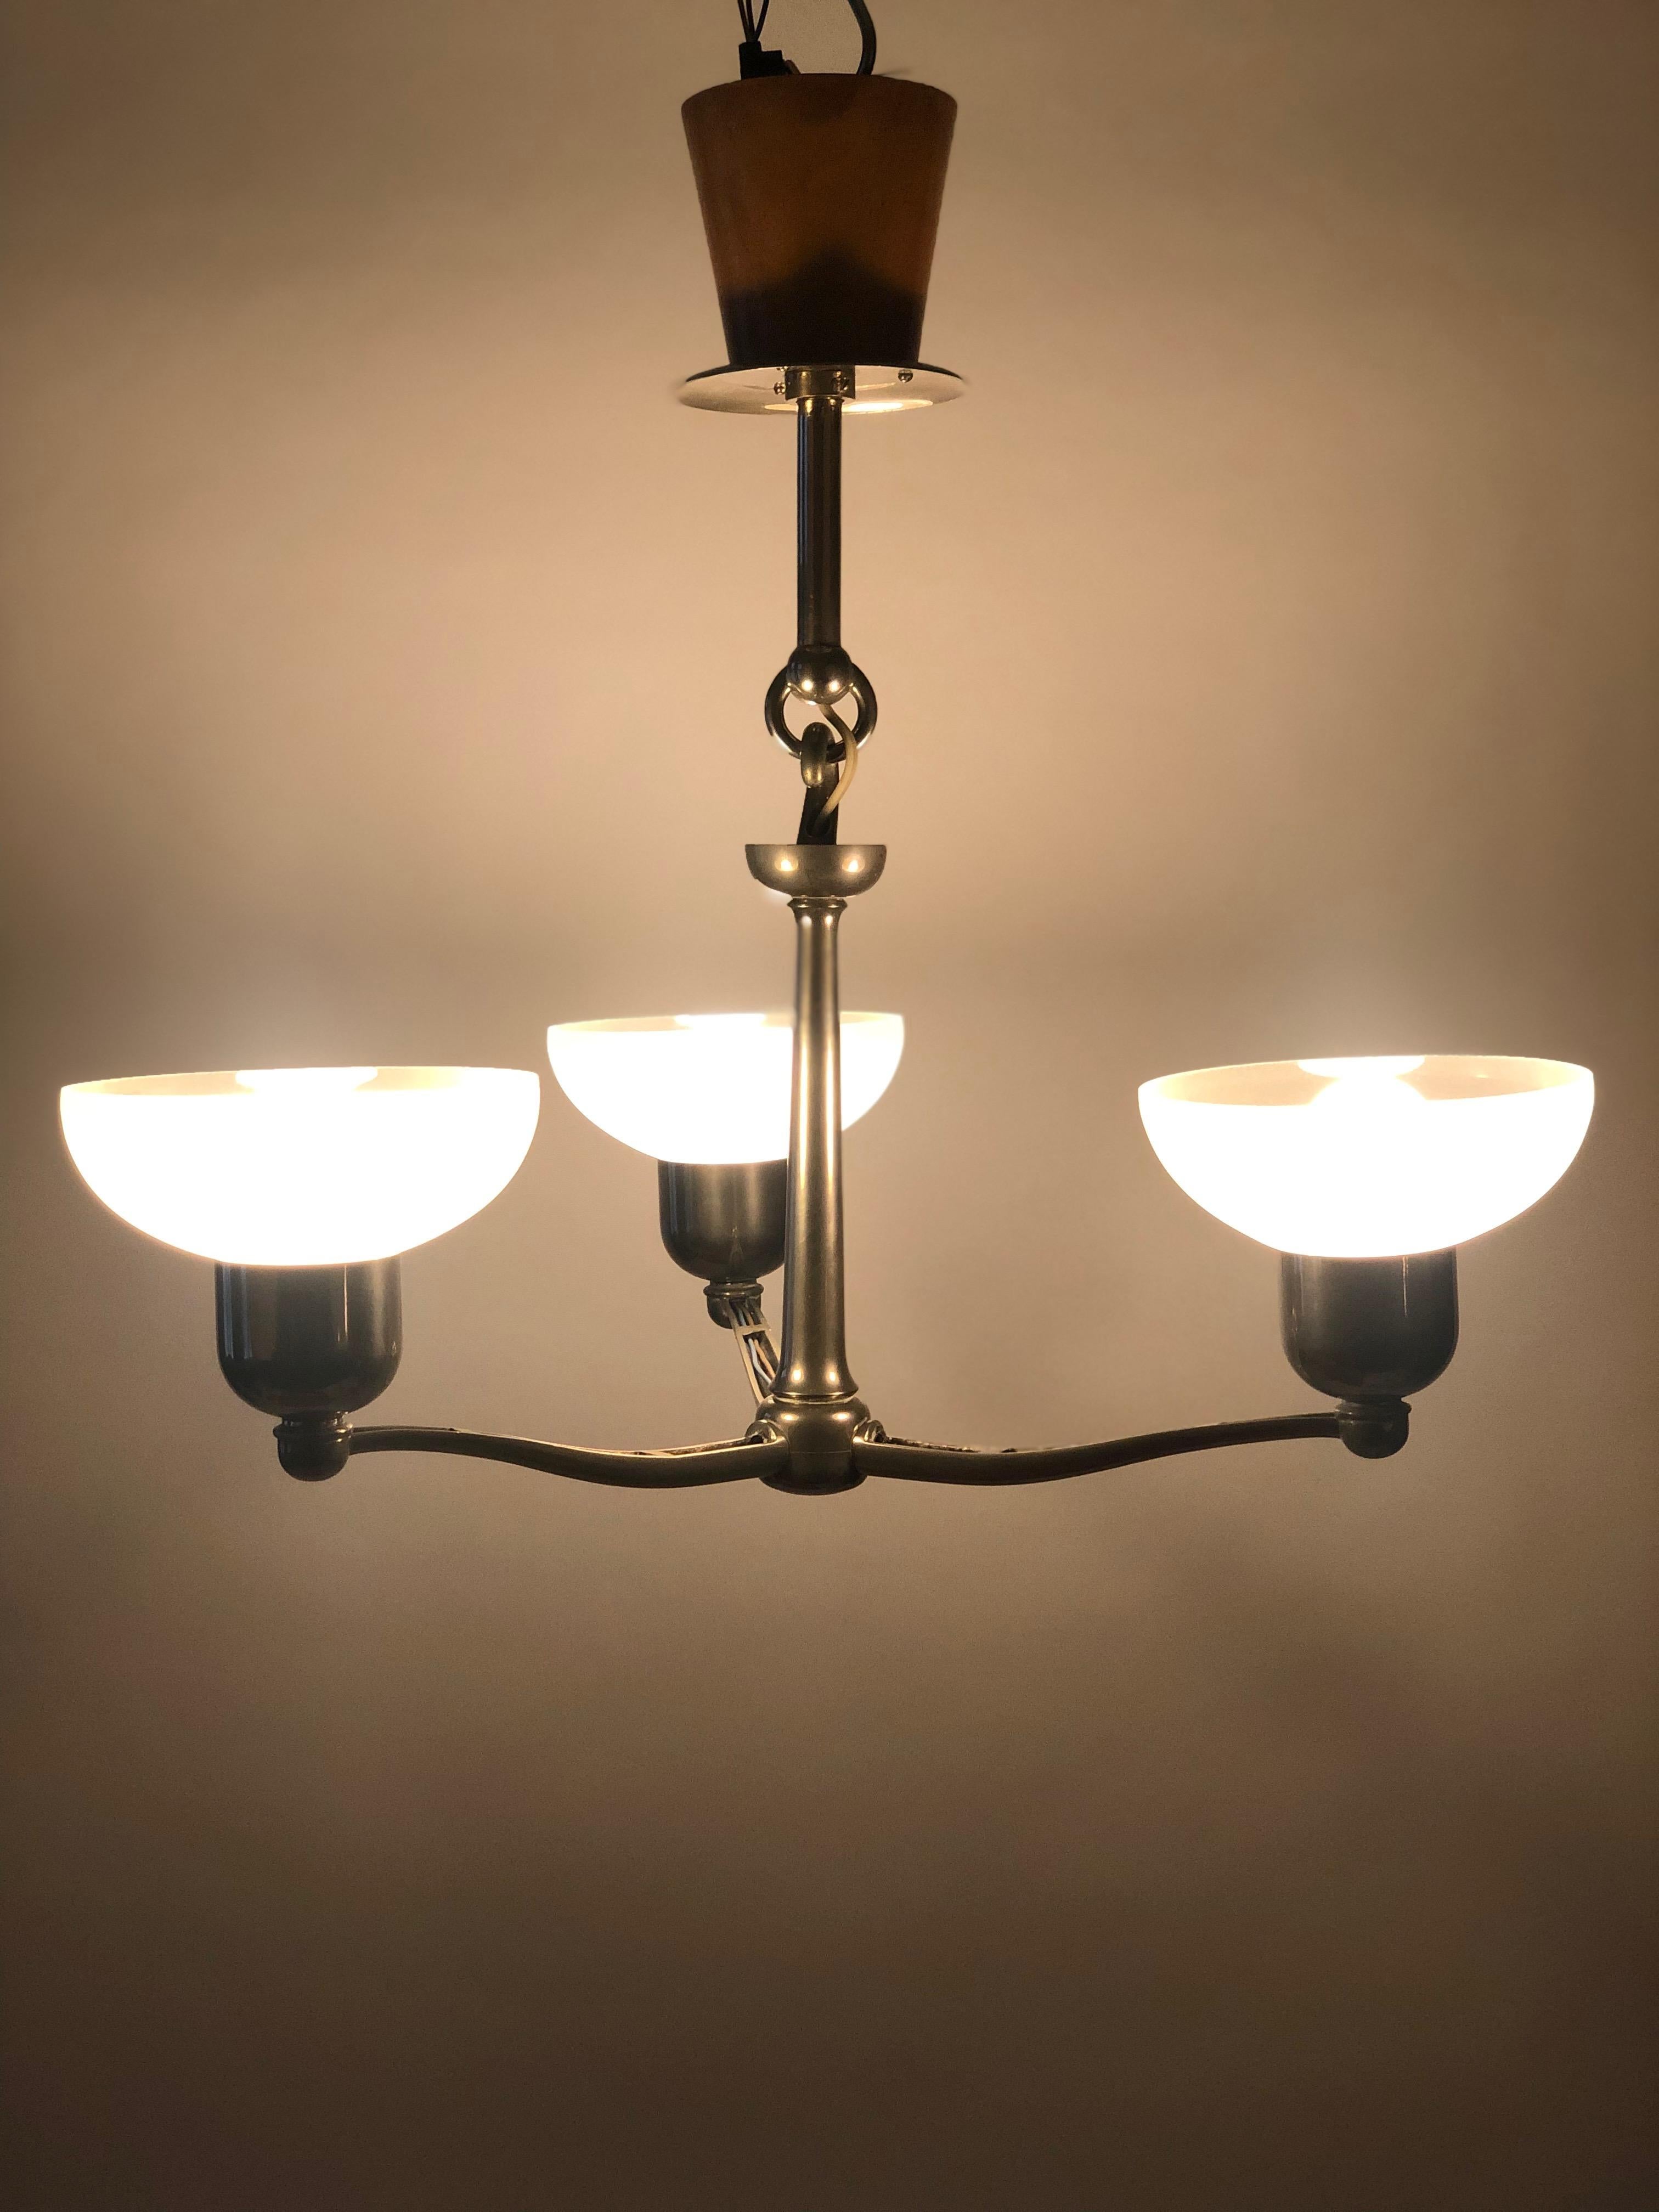 Rare Functionalist Pendant Light from the 1930's, Austria For Sale 6